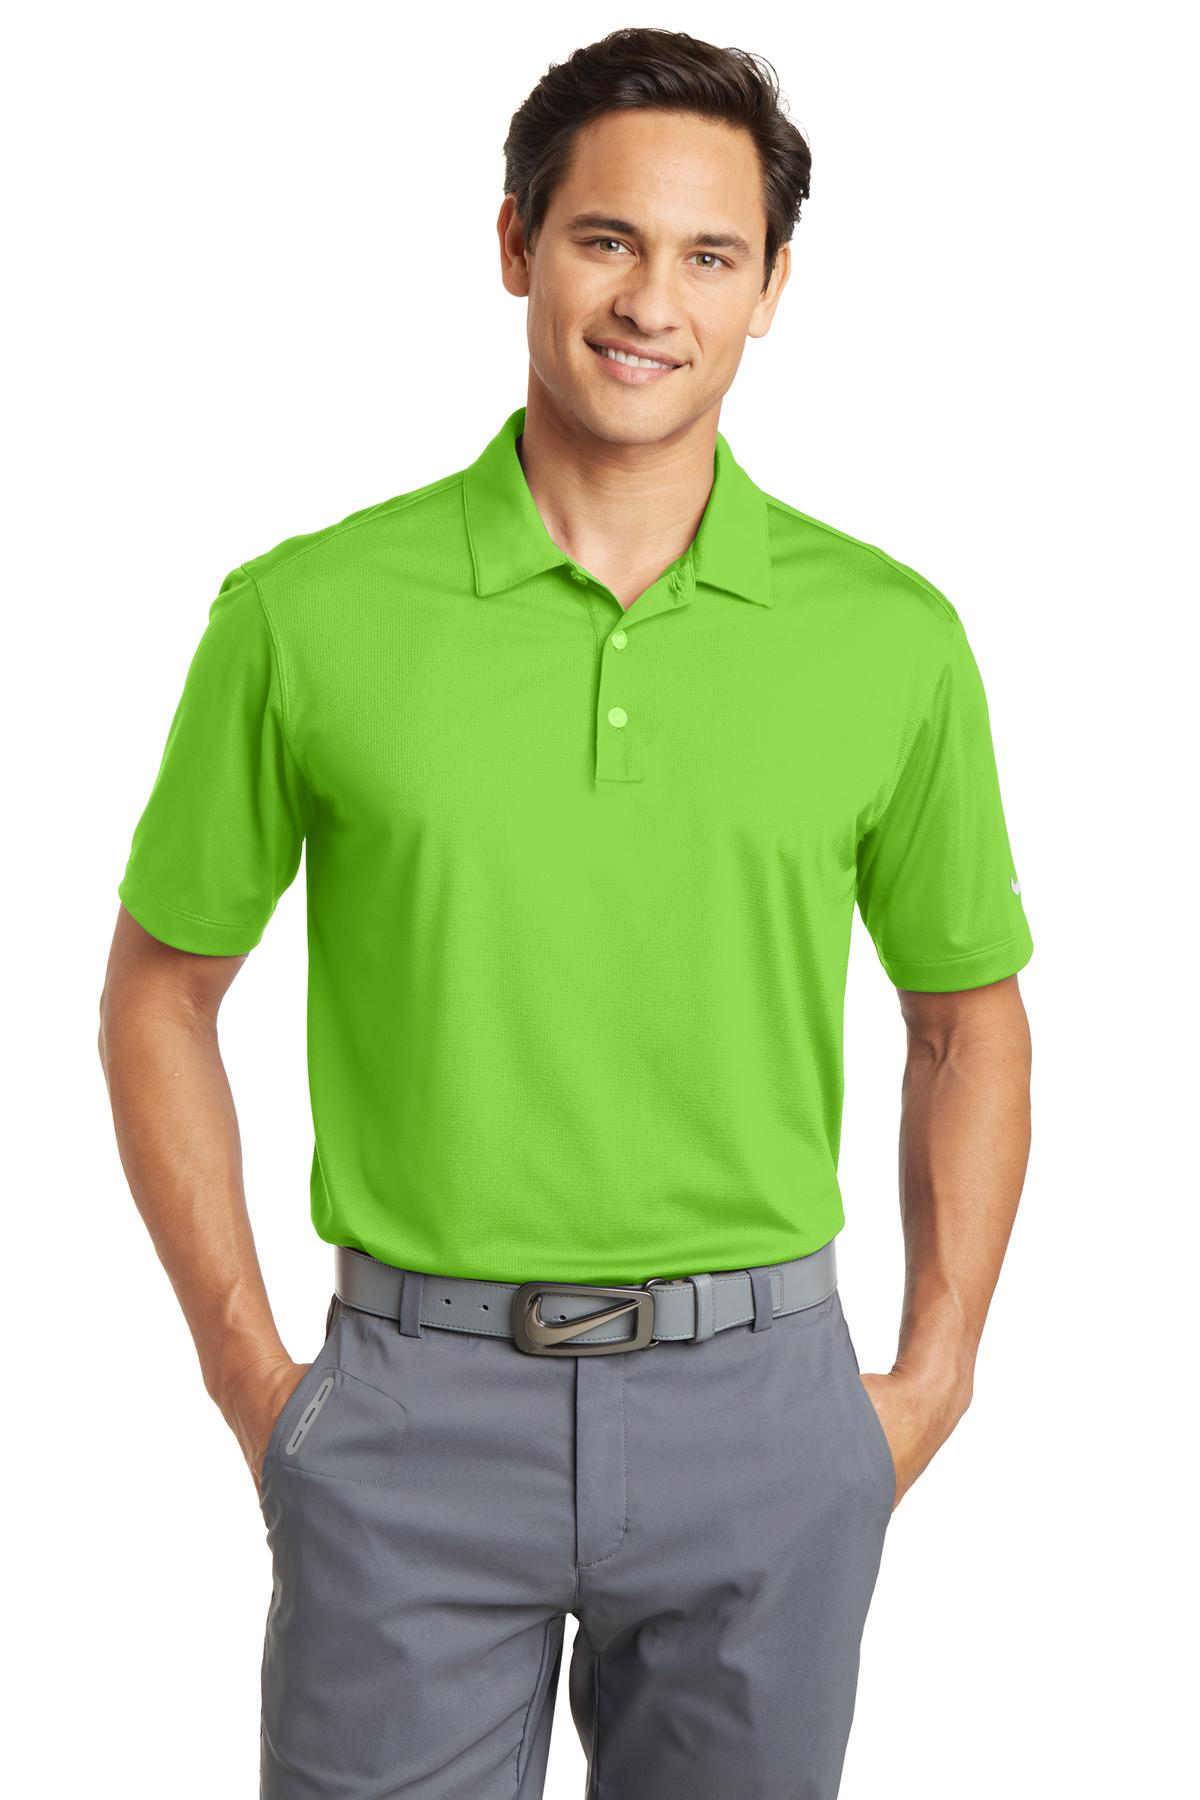 Nike Dri-FIT Vertical Mesh Polo. 637167 [Action Green] - DFW Impression